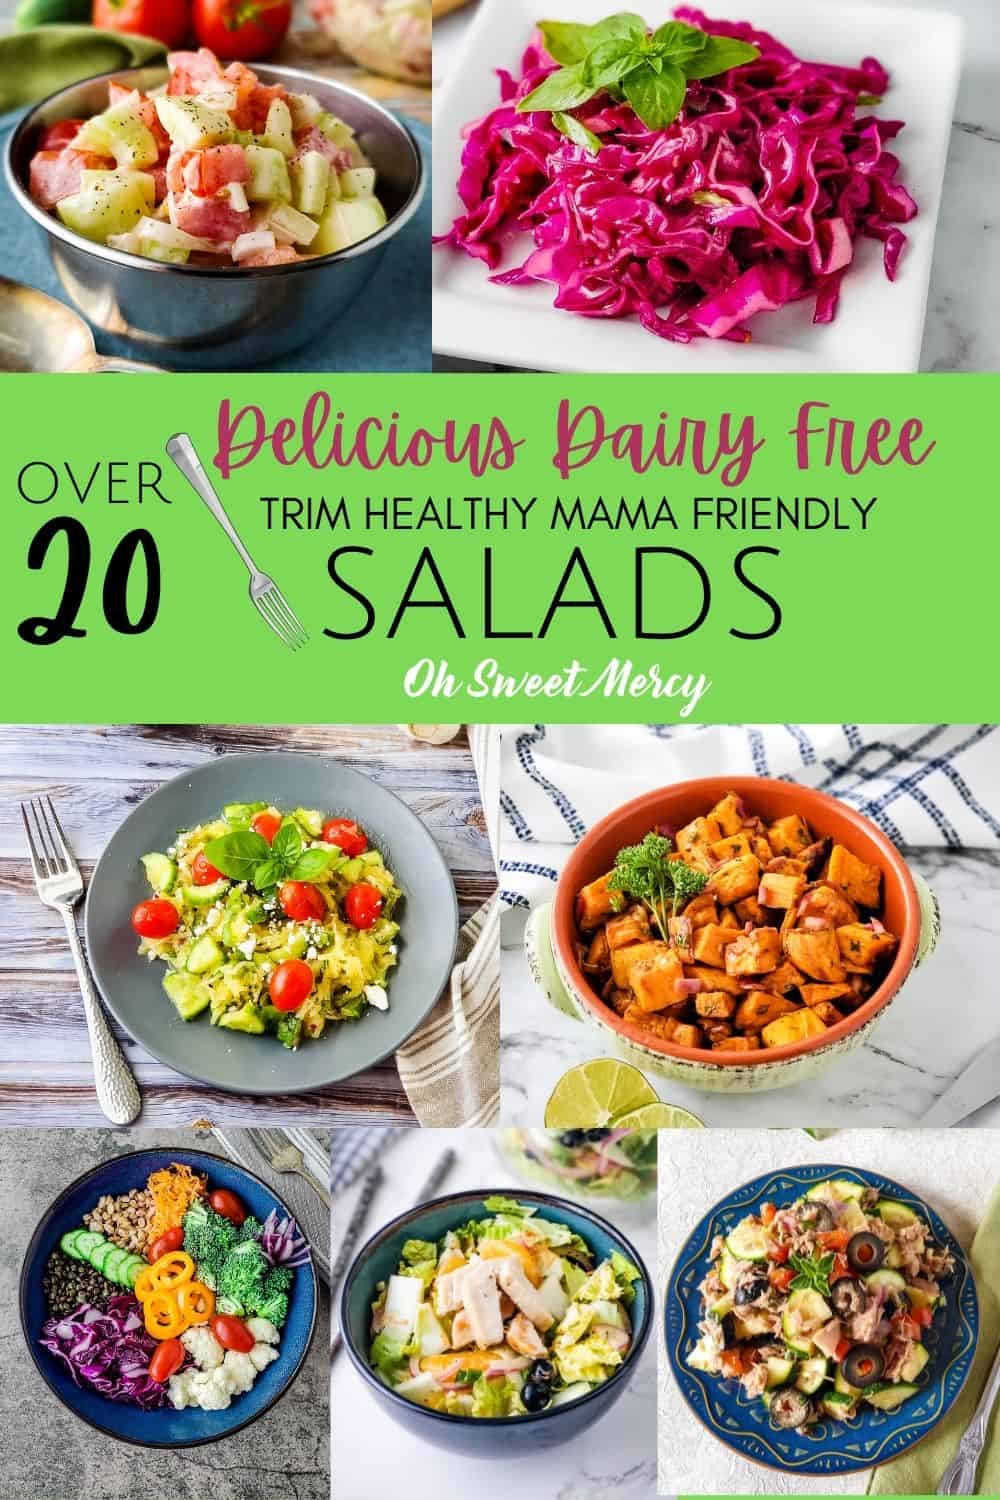 Think you have to have cheese on your salad or a creamy, dairy based dressing to make a delicious salad? Think again! These 20+ THM friendly dairy free salad recipes prove you don't need dairy for a tasty salad. #salad #roundup #thm #dairyfree #saladrecipes